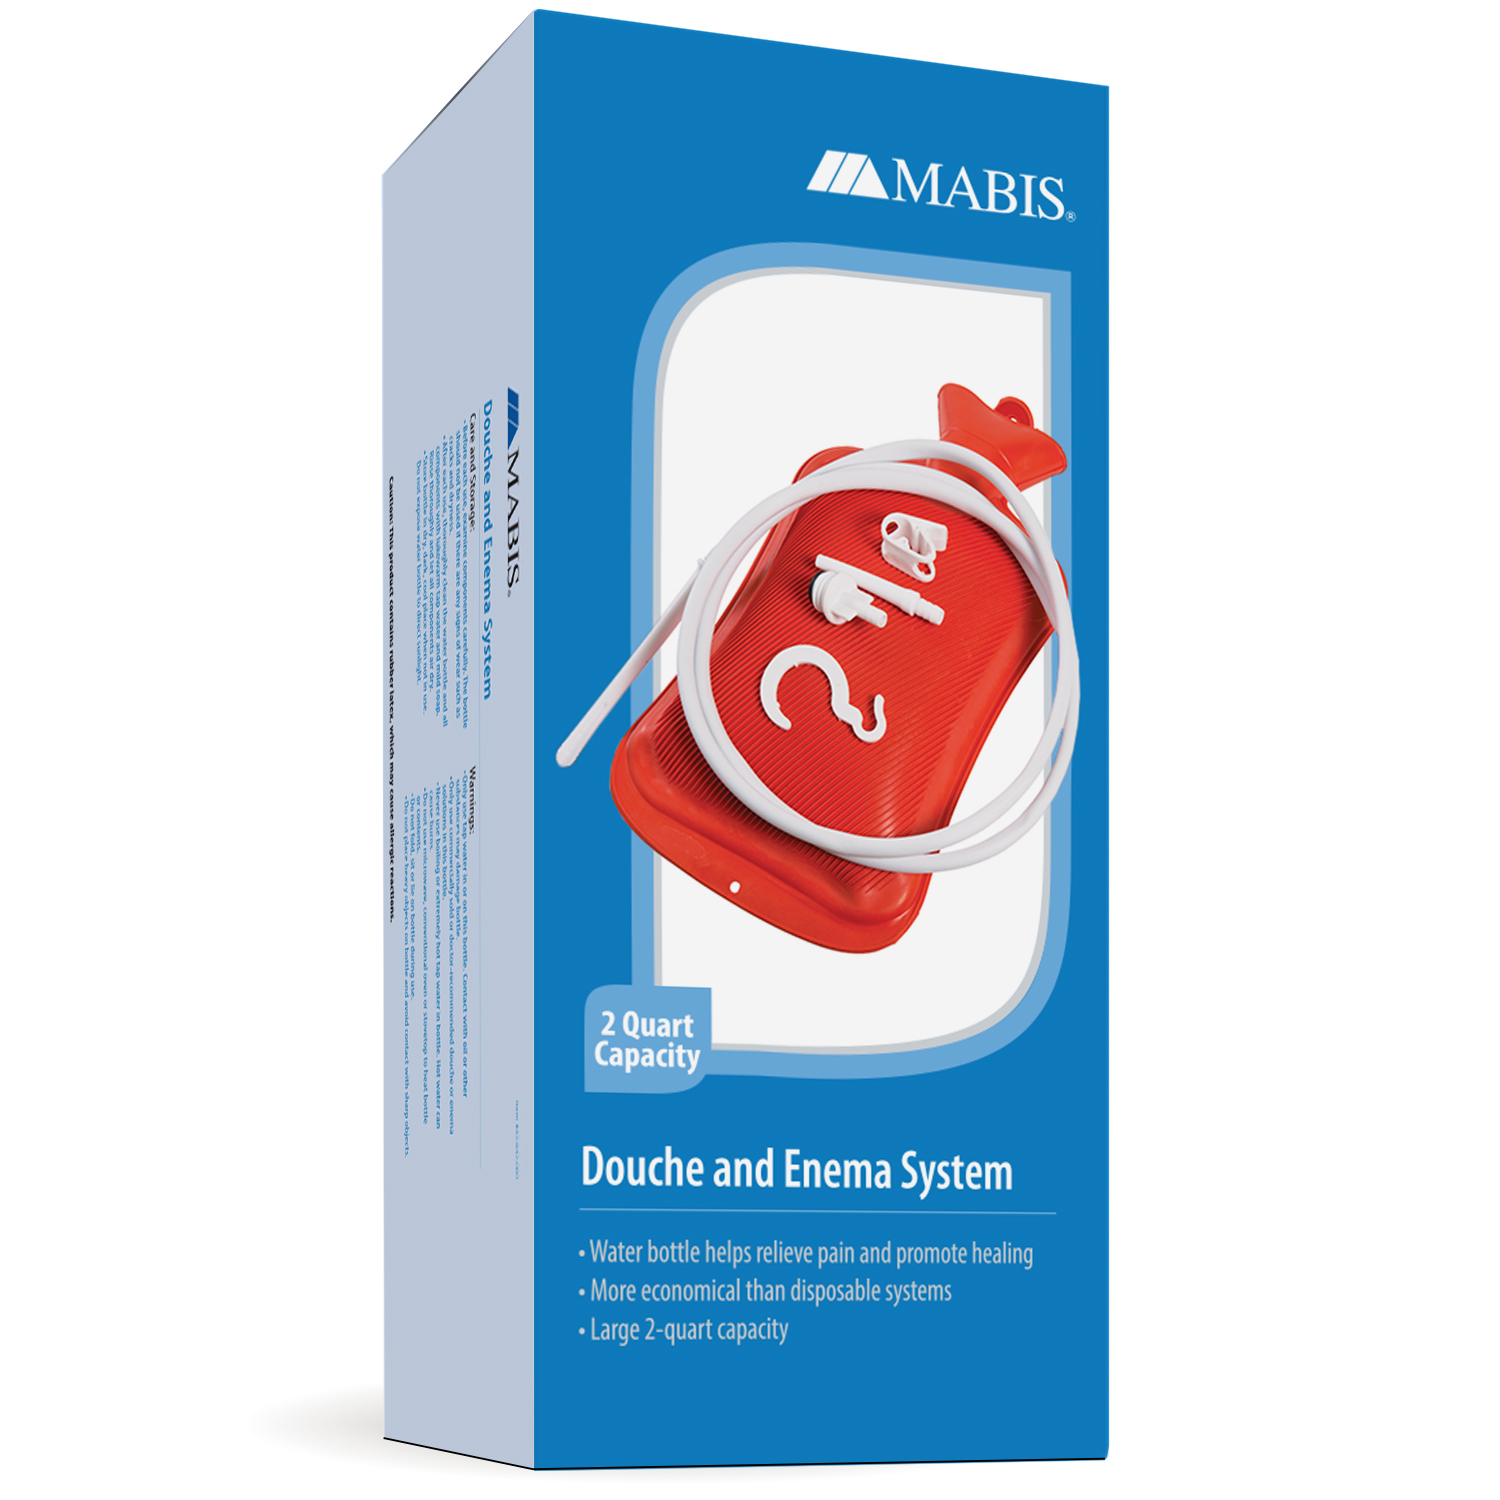 MABIS Reusable Hot Water Bottle, Enema and Douche Kit Helps to Alleviate Pain Associated with Constipation, Bloating, Aches and Pains, 2 Quart Capacity - image 1 of 7